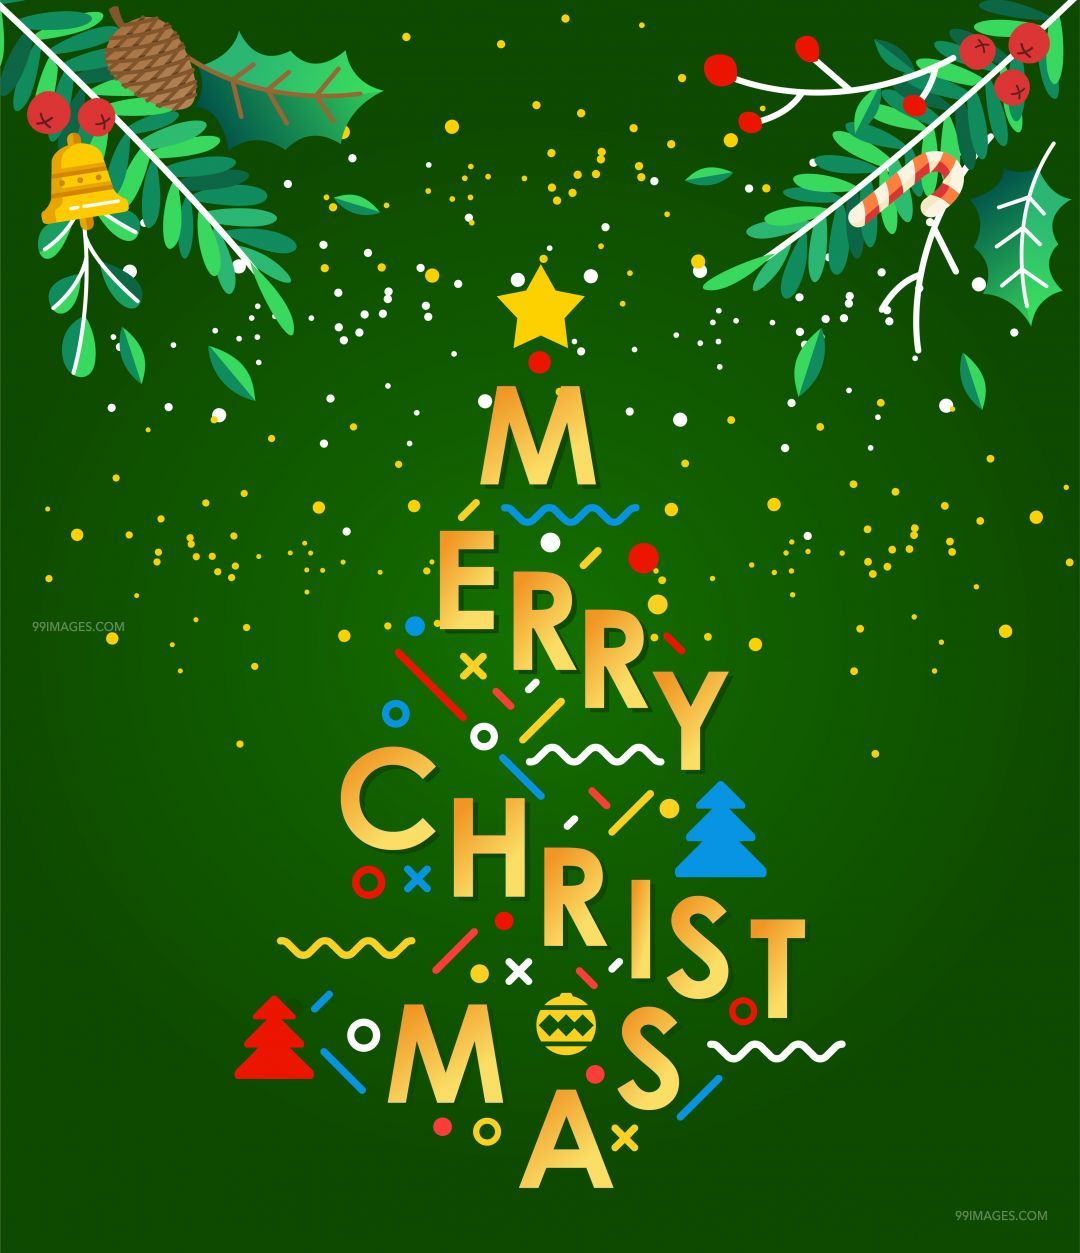 Merry Christmas [25 December 2019] Images, Quotes, - Merry Christmas 2020 Hd Posters - HD Wallpaper 